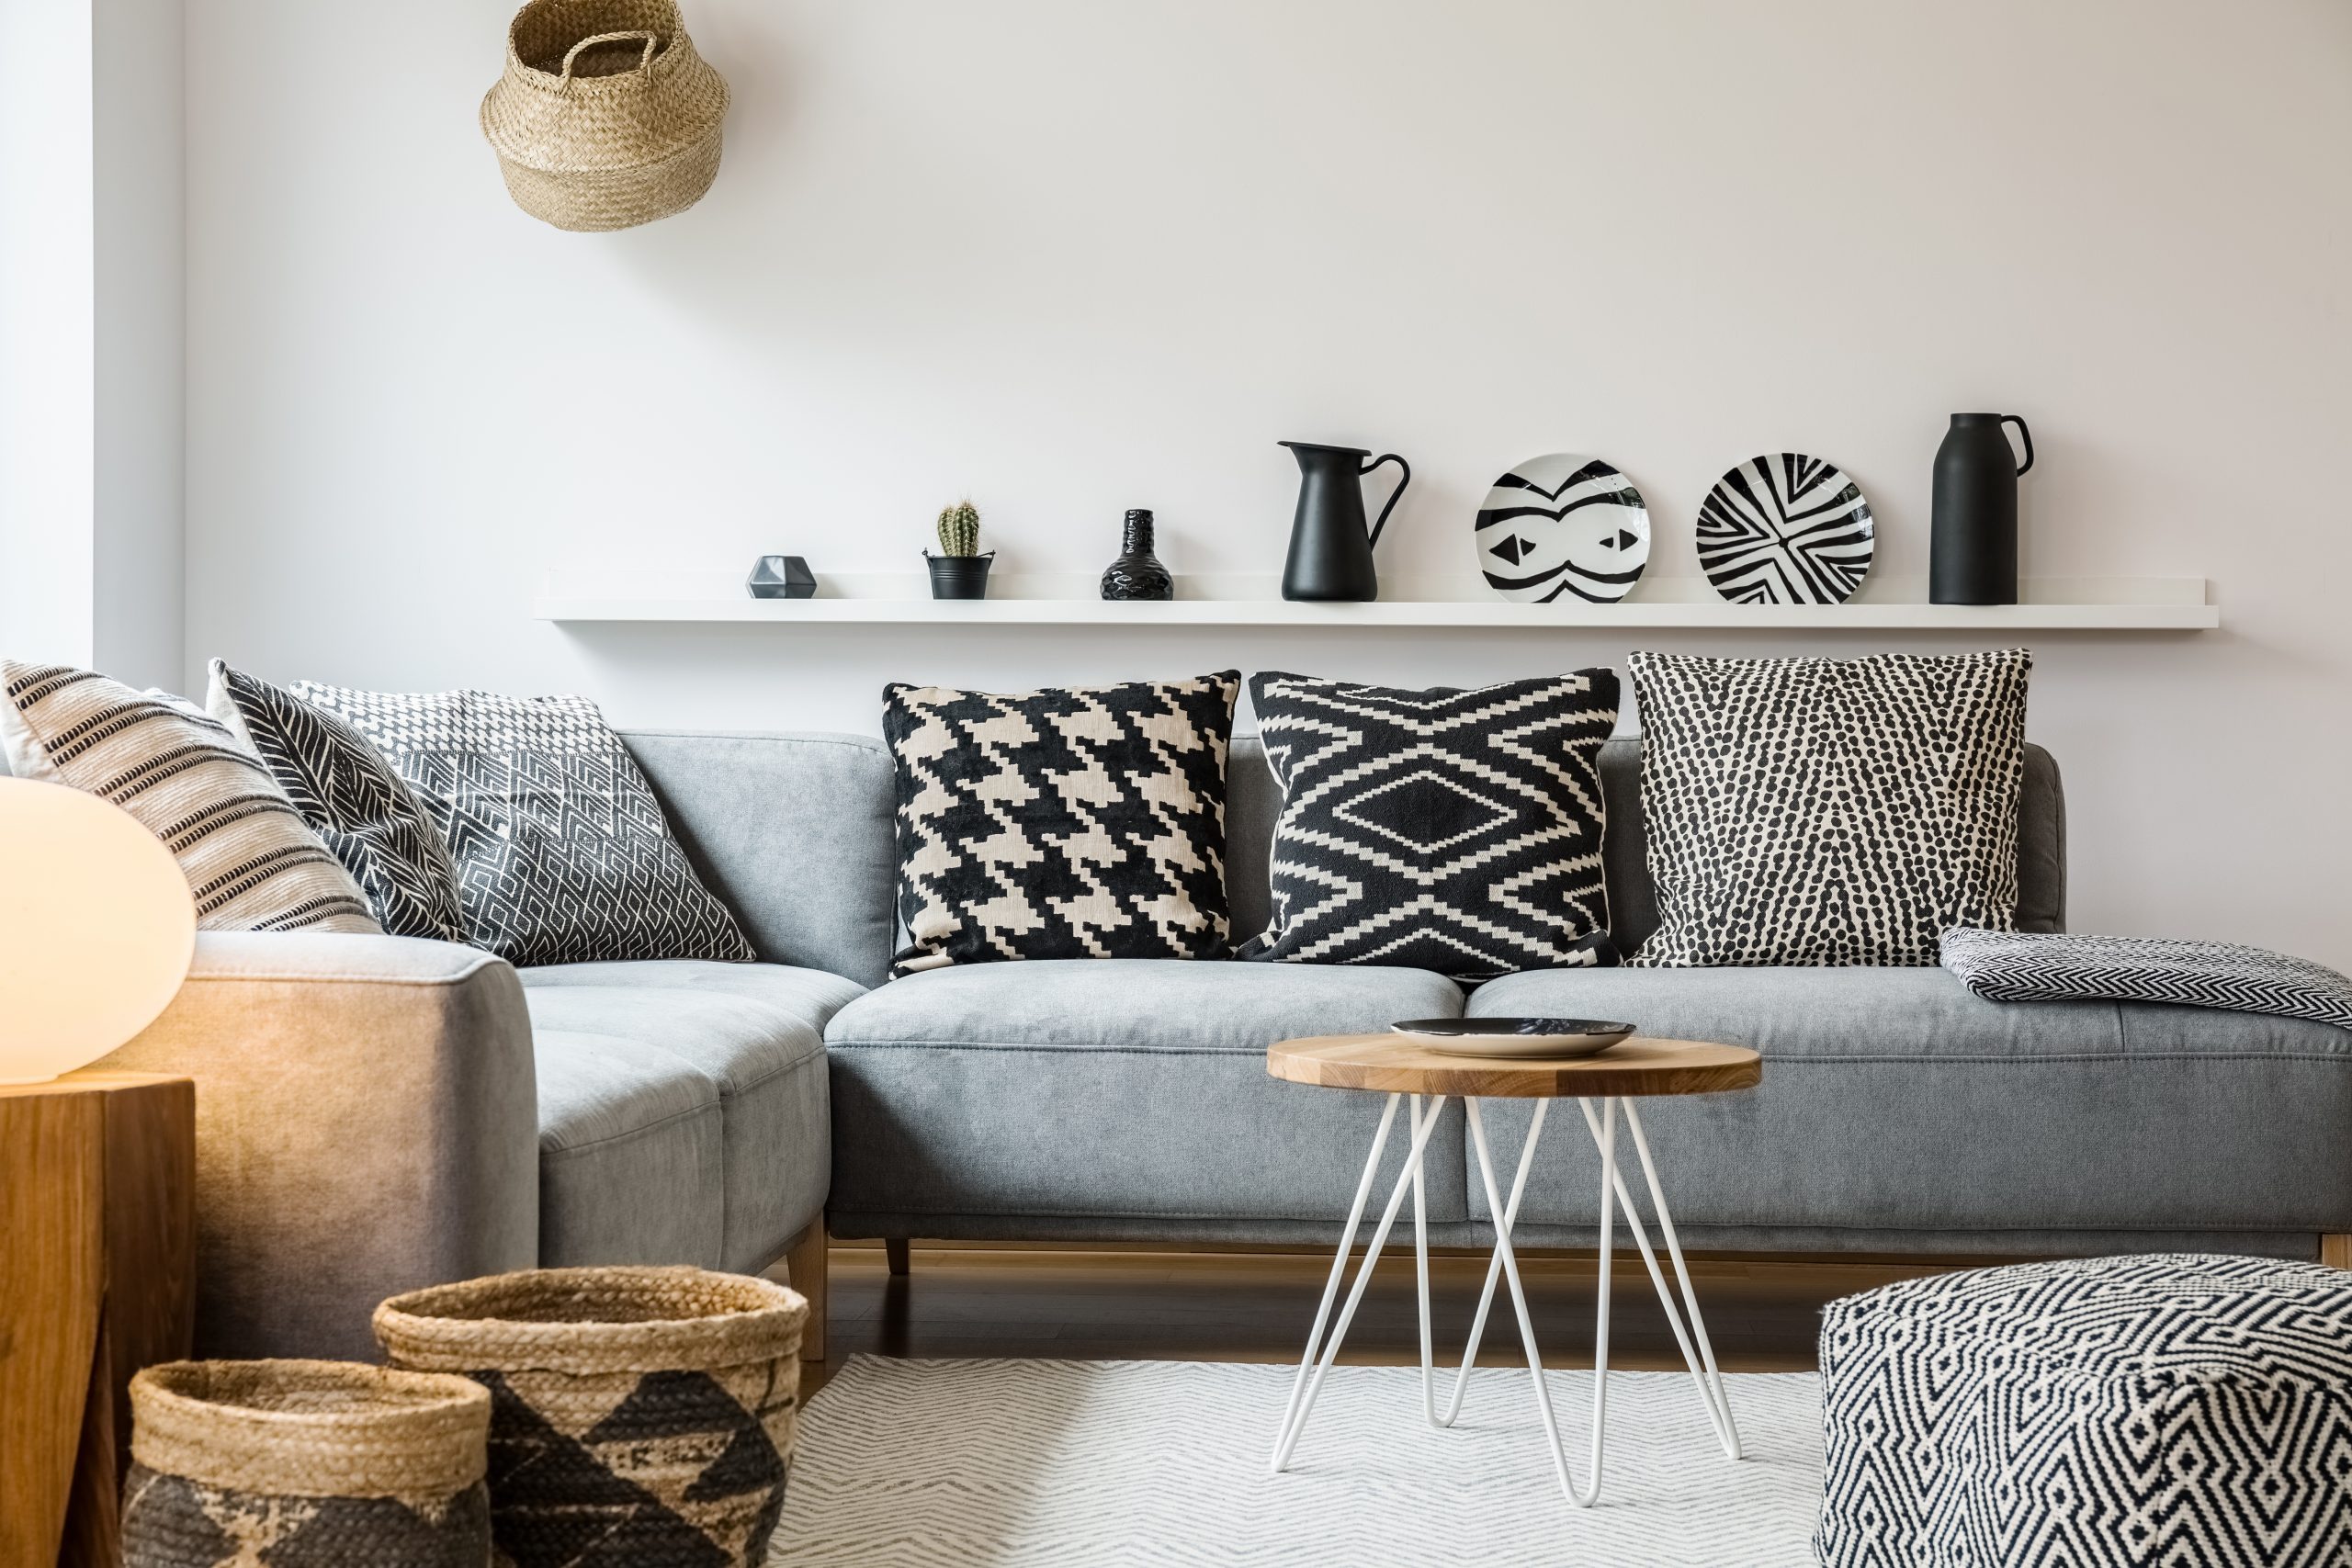 Patterned pillows on grey couch in modern living room interior with pouf and wooden table. Real photo